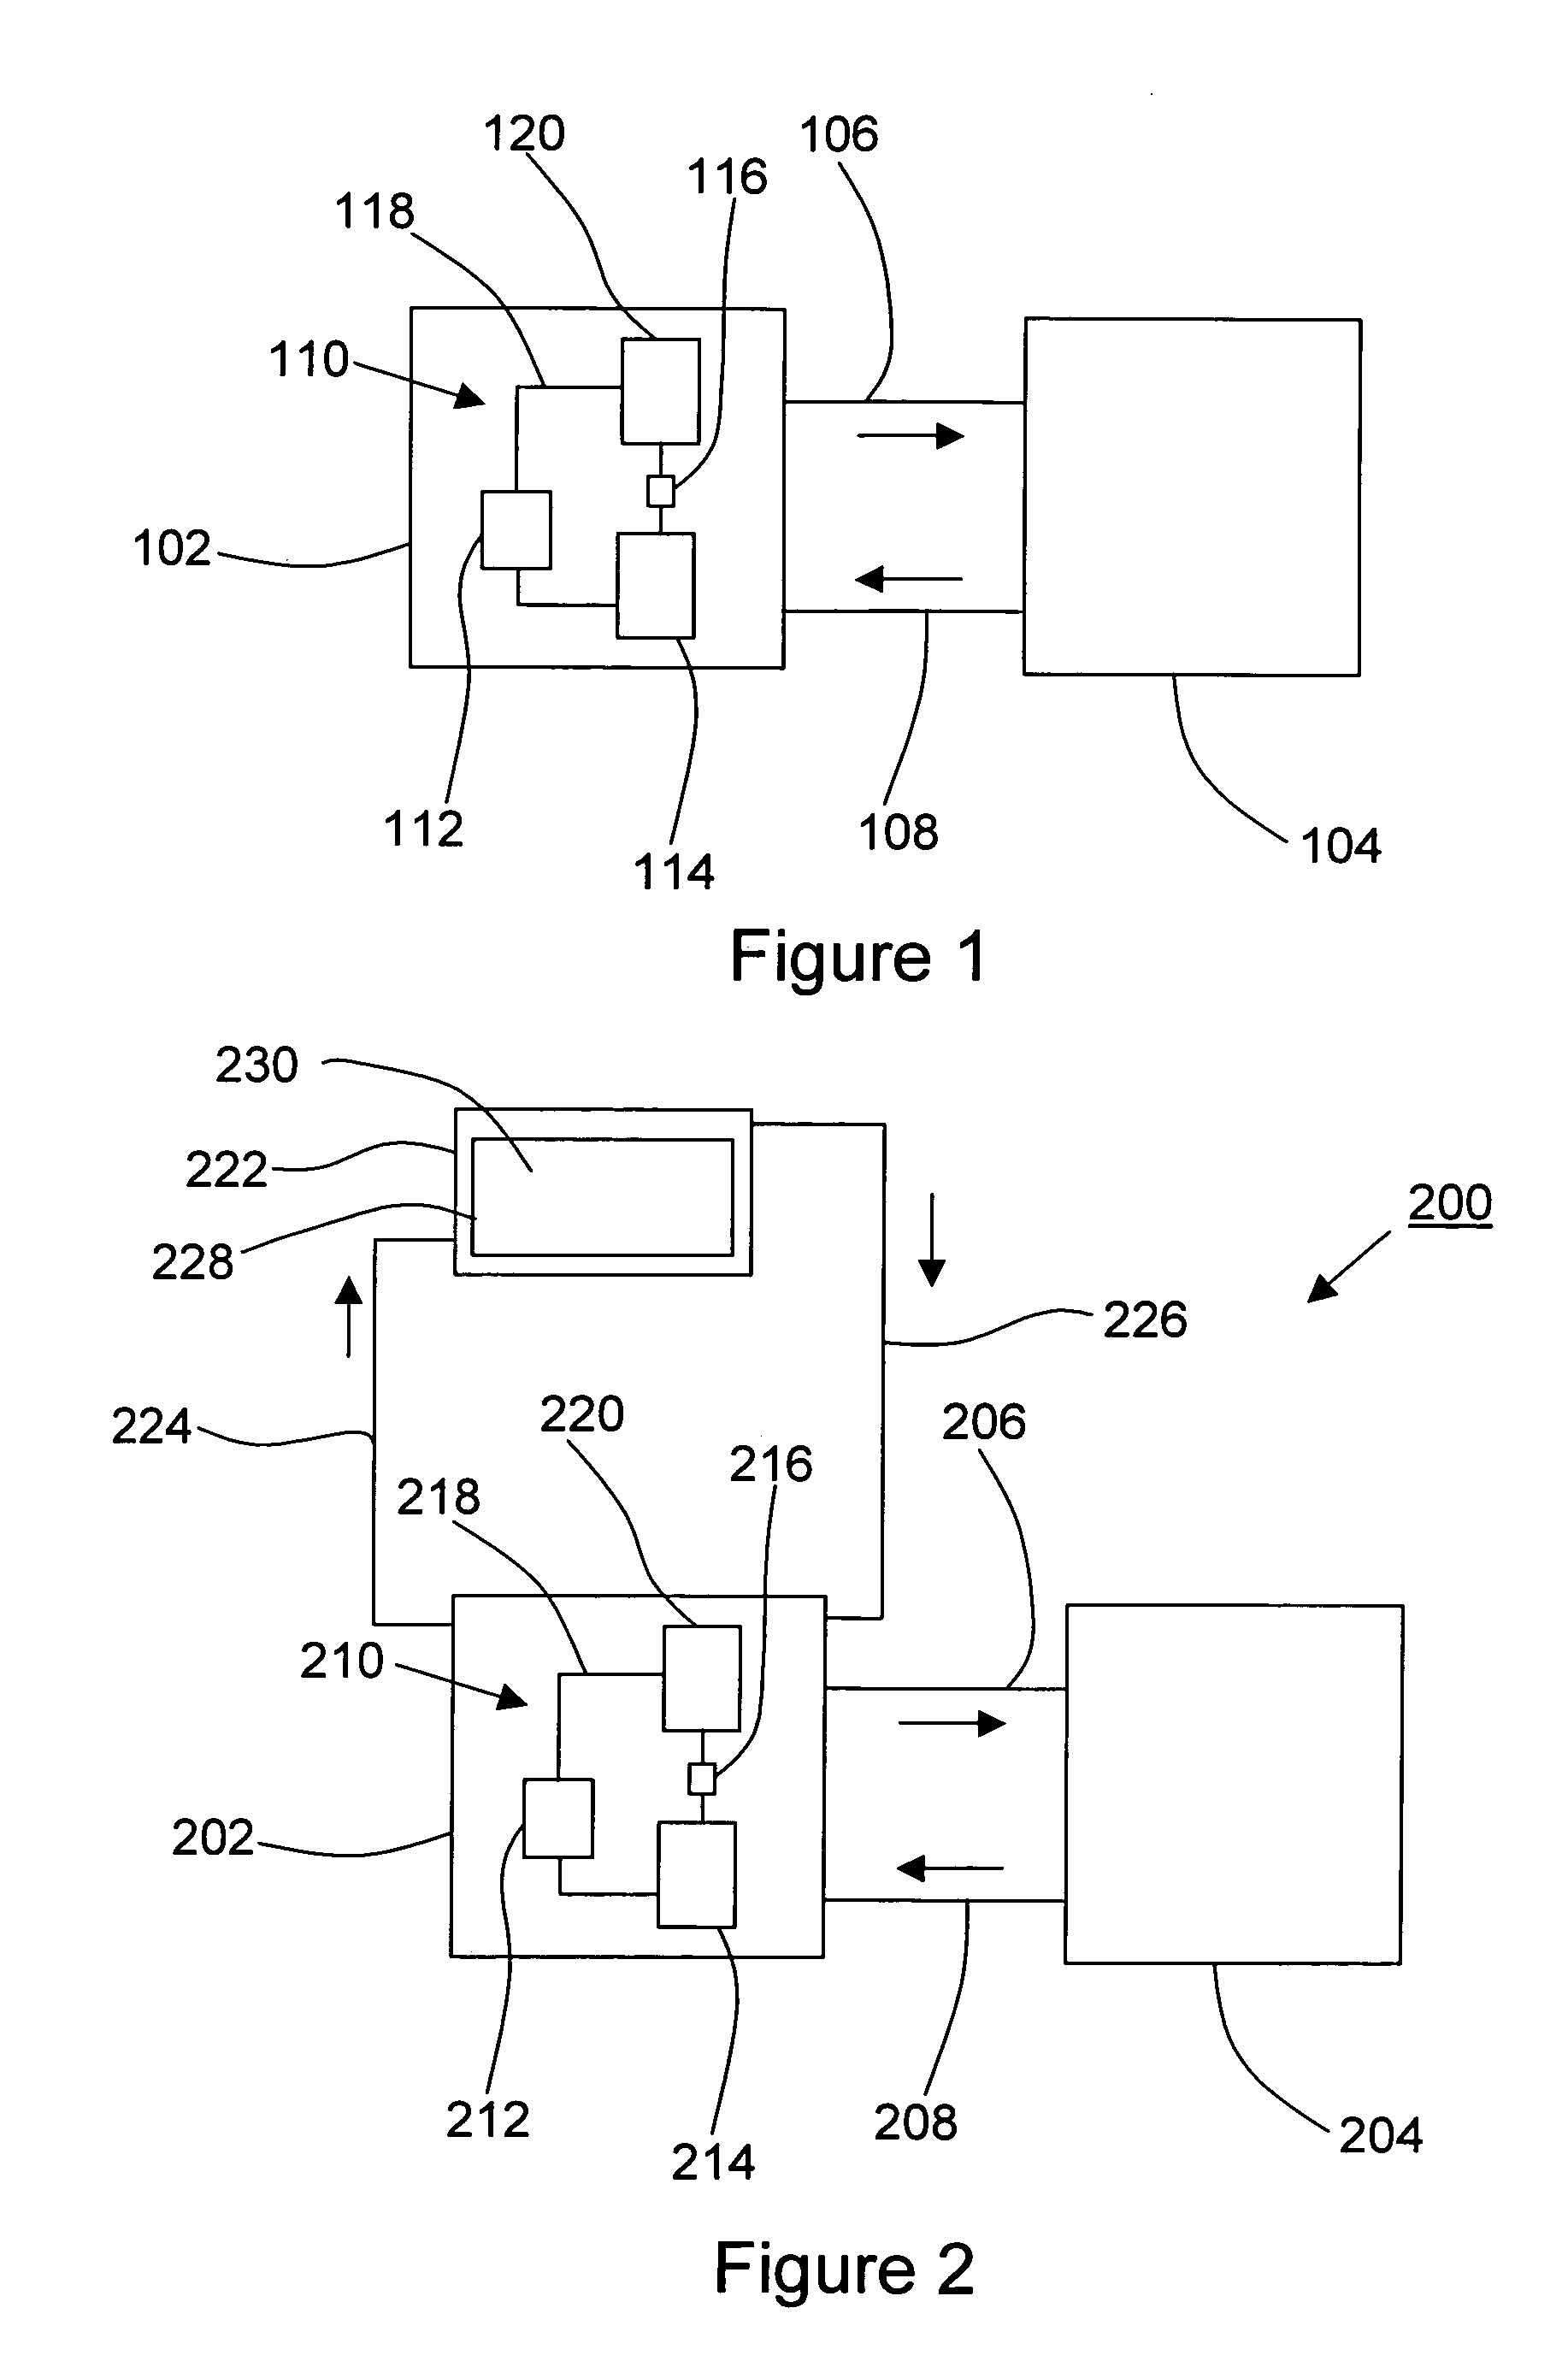 Ground-based aircraft air conditioner with thermal storage